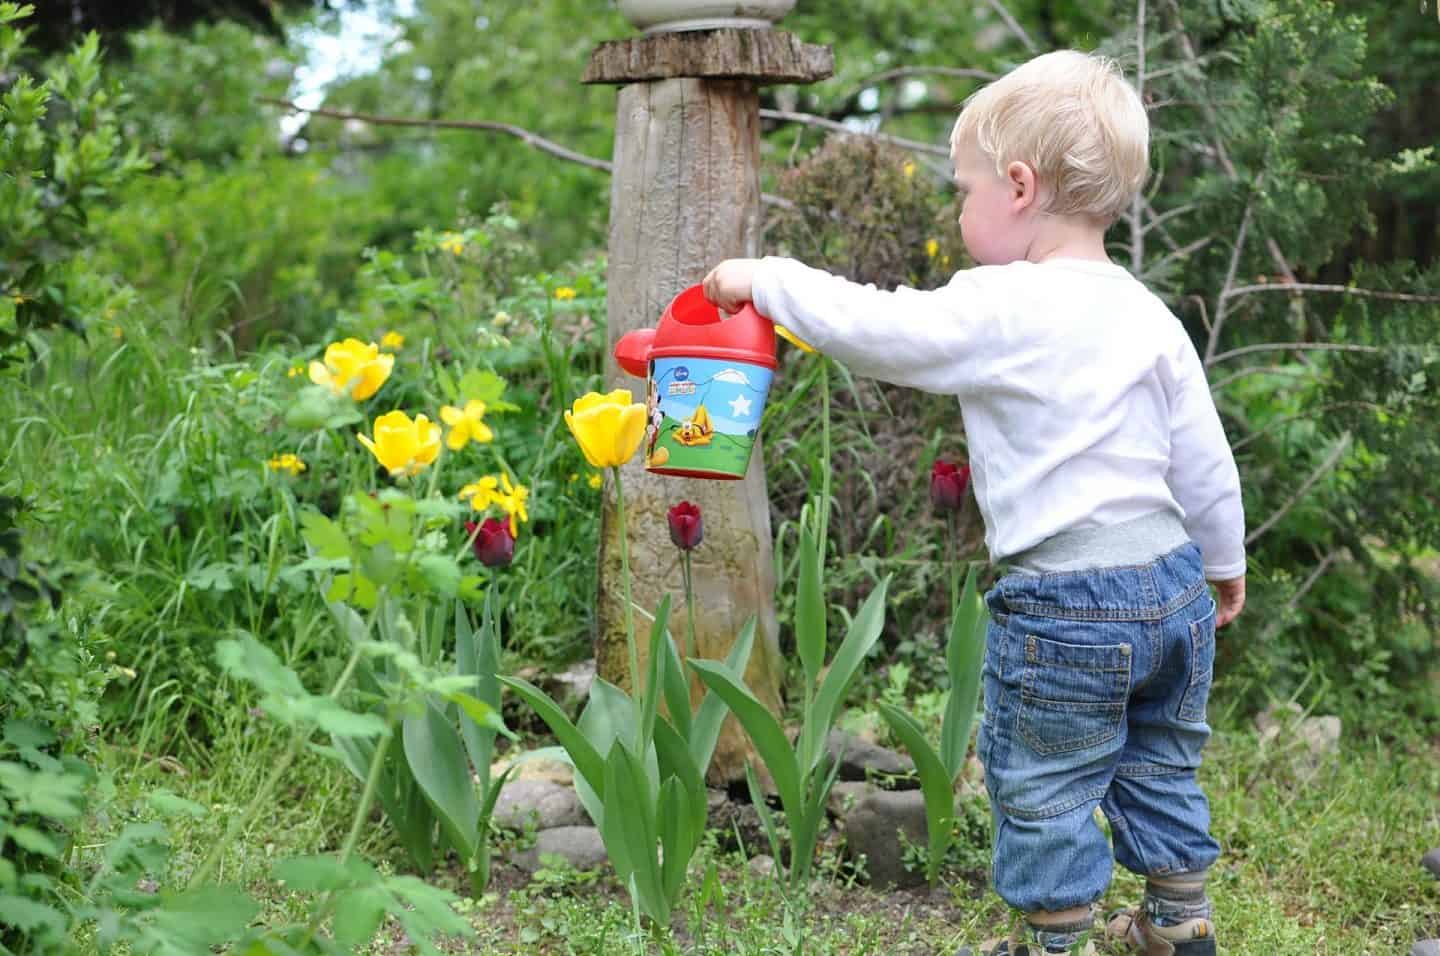 How to get kids involved in gardening